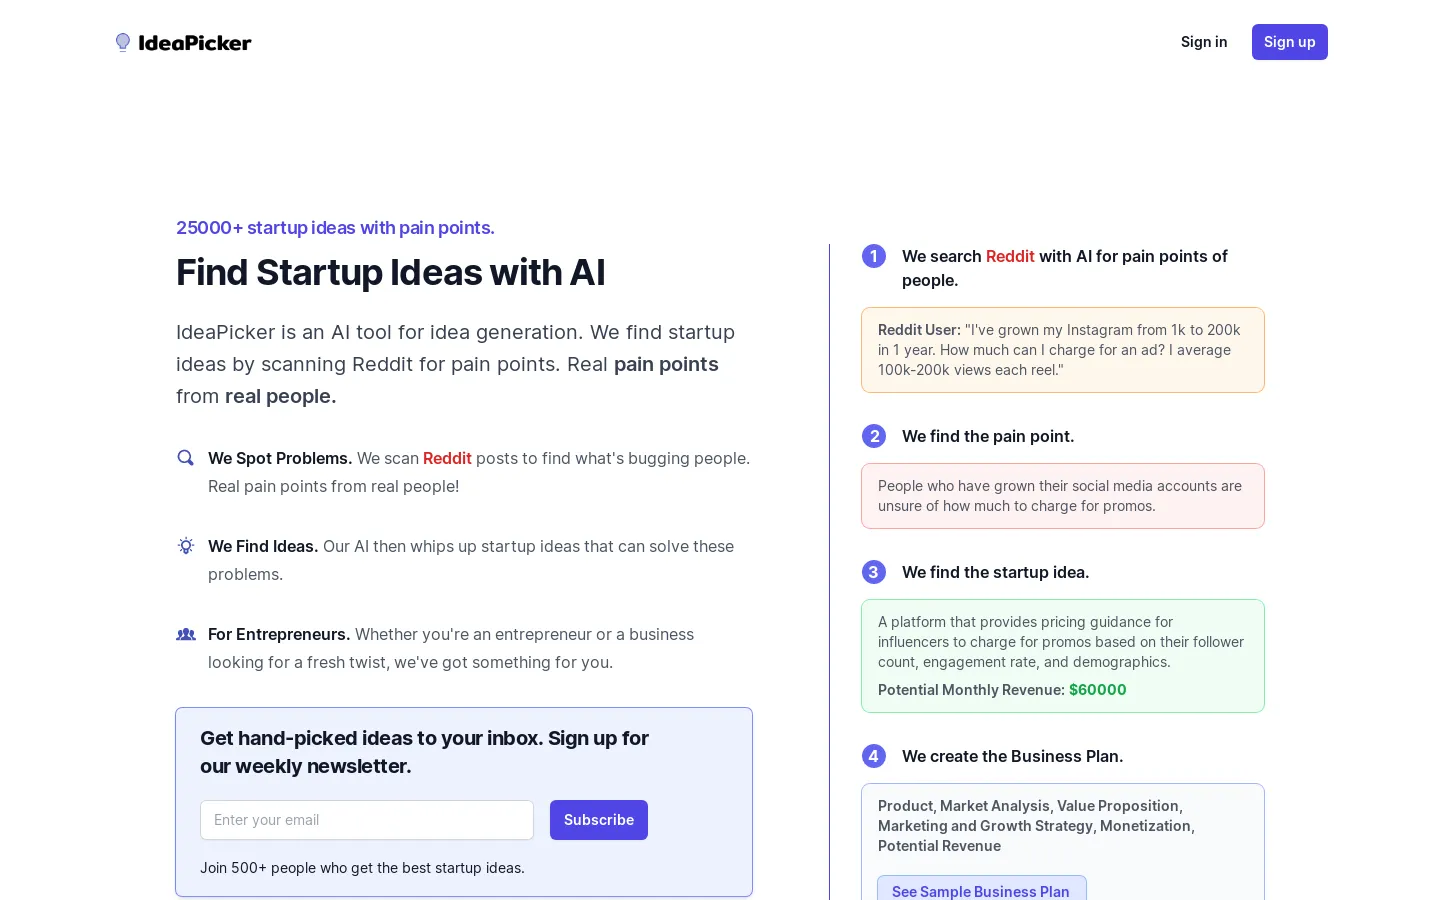 Find Startup Ideas with AI | IdeaPicker